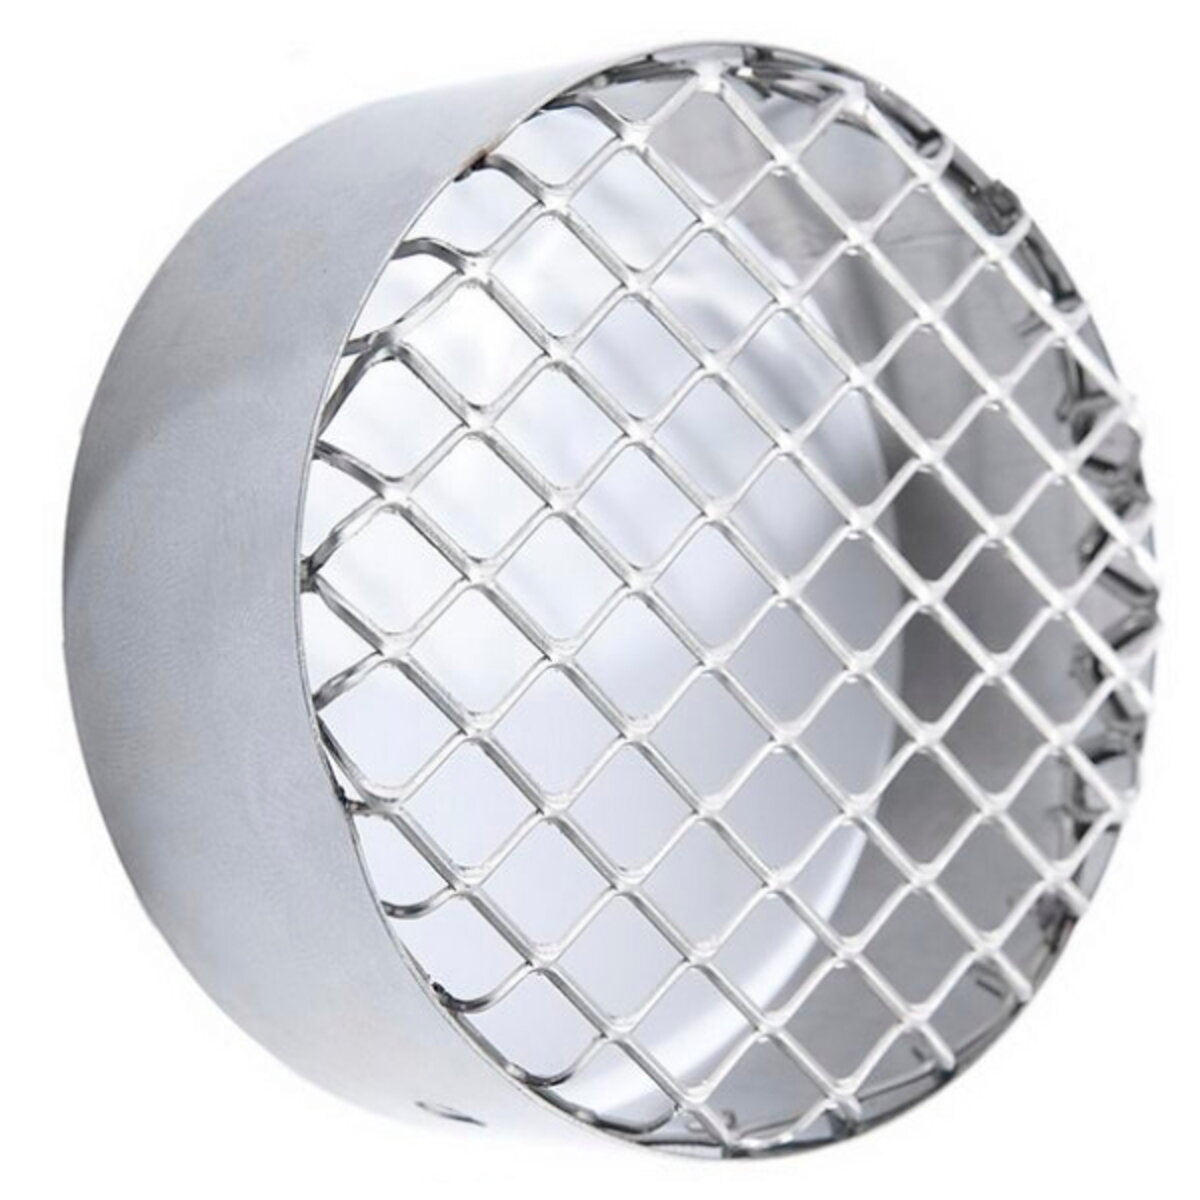 Anti-intrusion suction grille for condensing boiler fumes outlet diam. 100mm. stainless